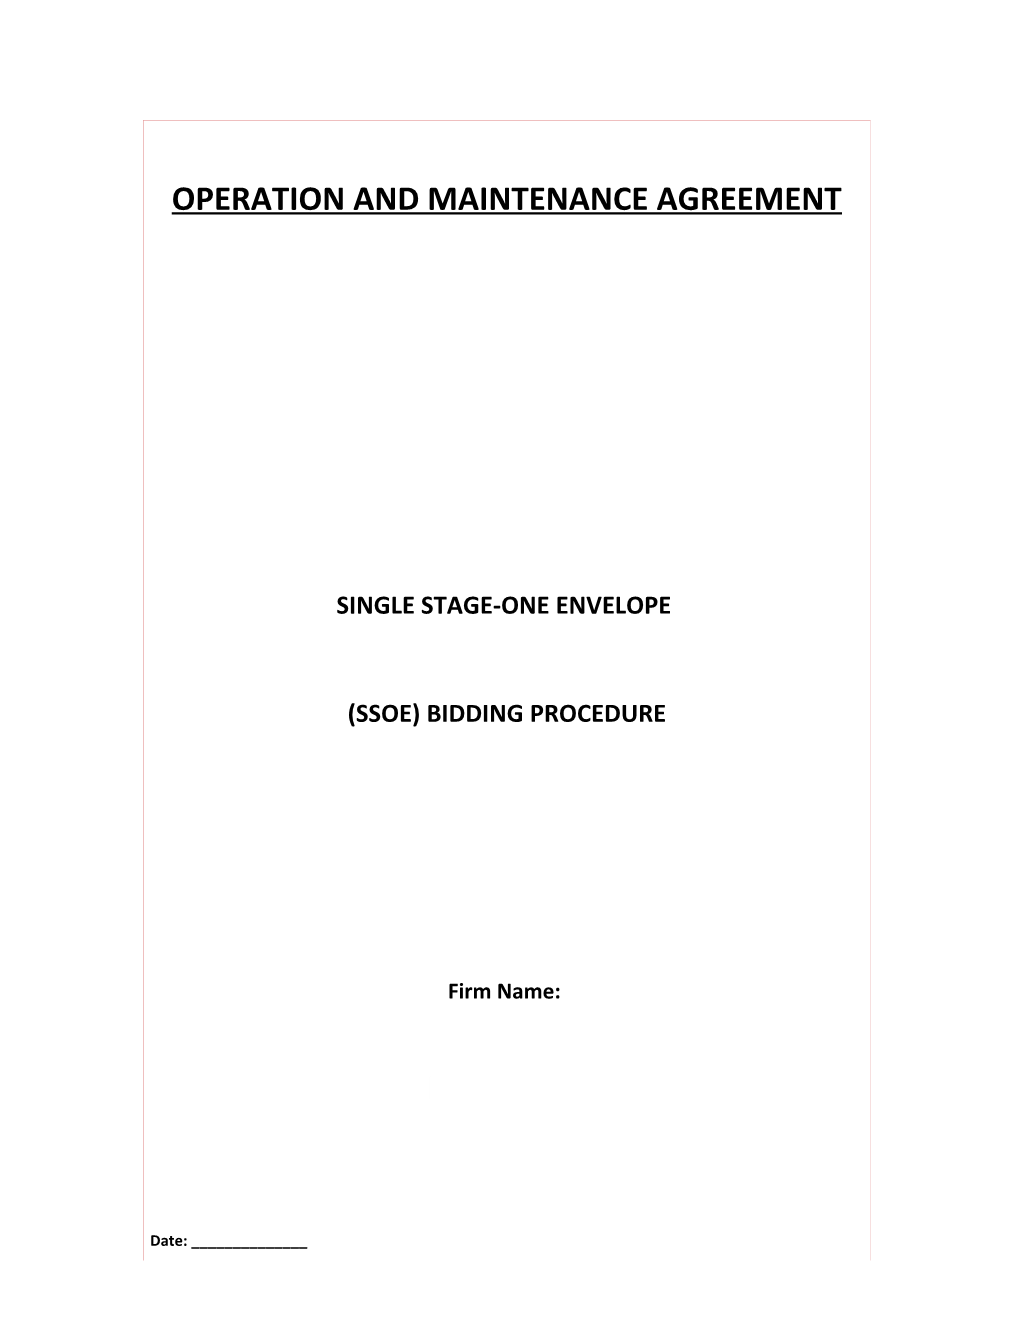 Operation and Maintenance Agreement